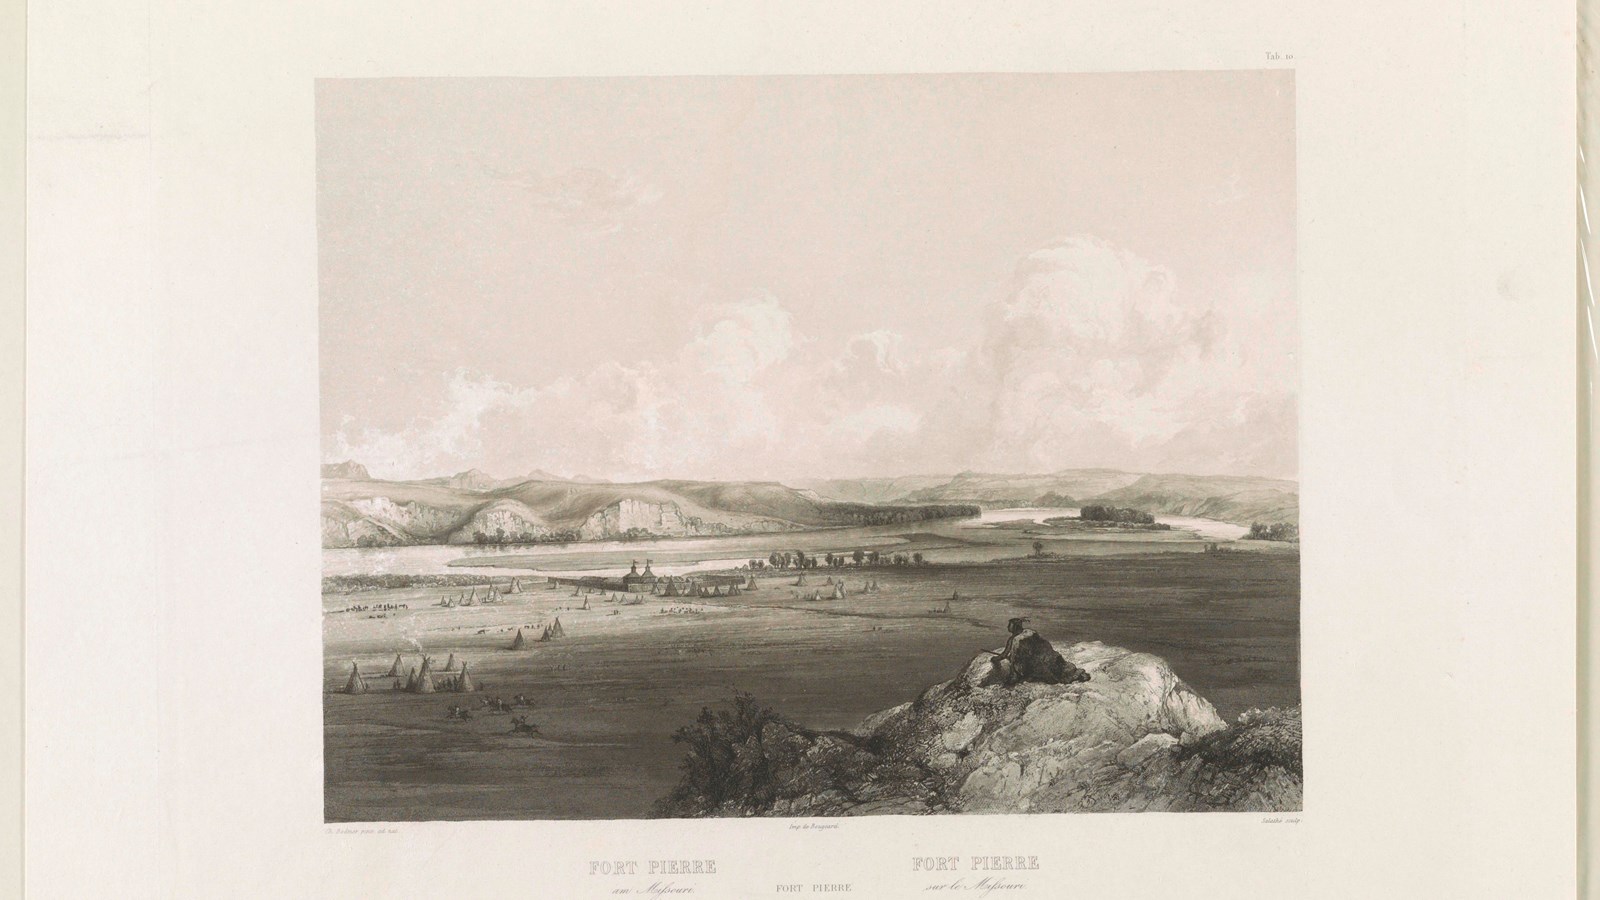 Illustration likely completed by Charles Bodmer in the 1830s showing Fort Pierre. 